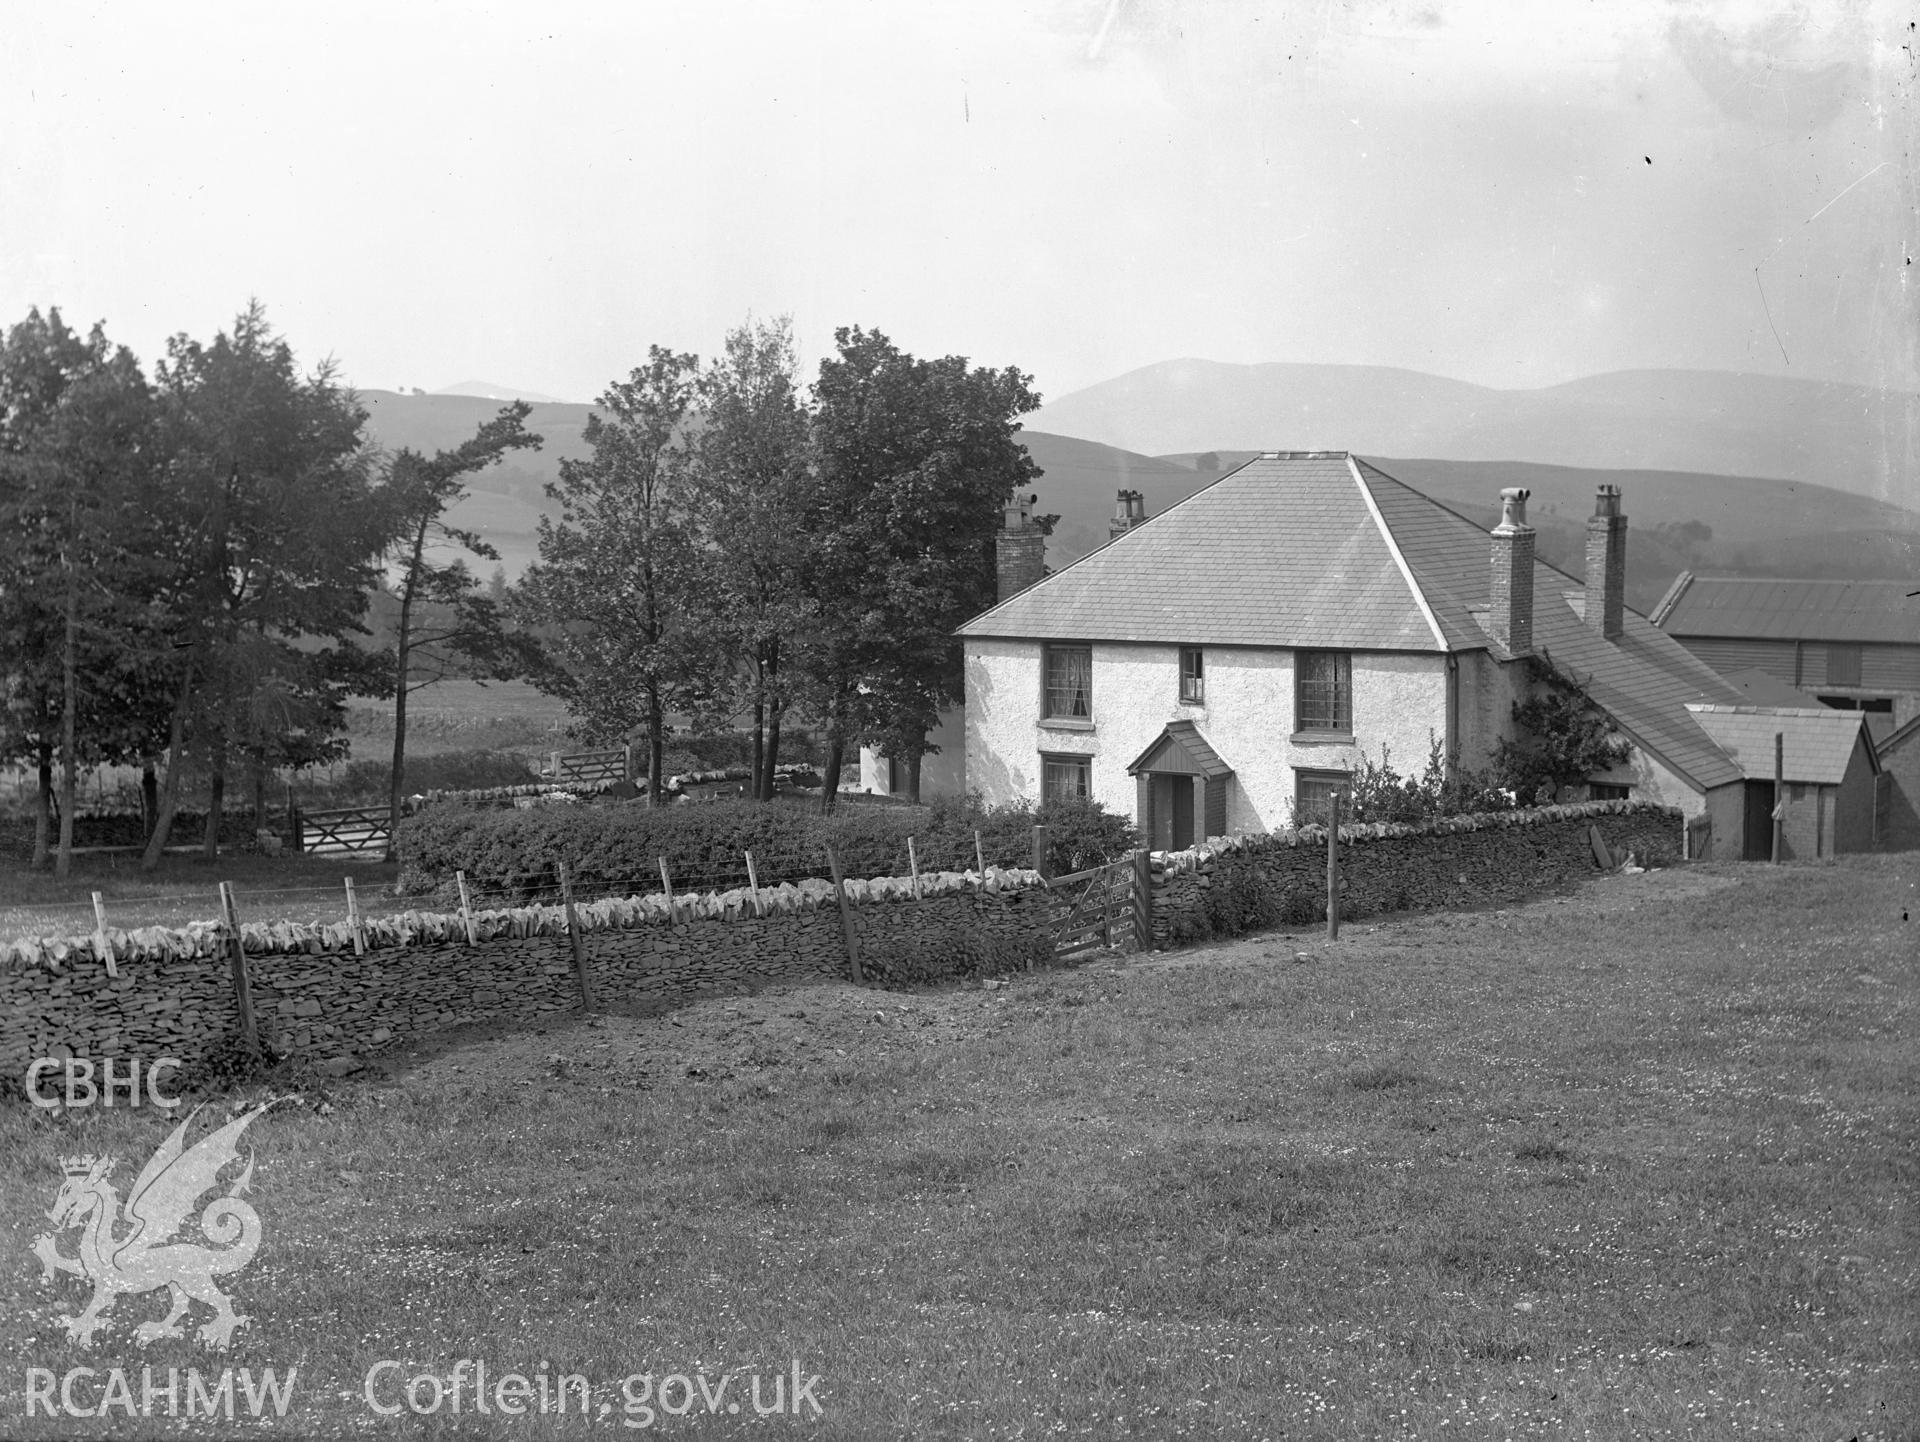 Black and white glass negative showing an unidentified house and buildings.